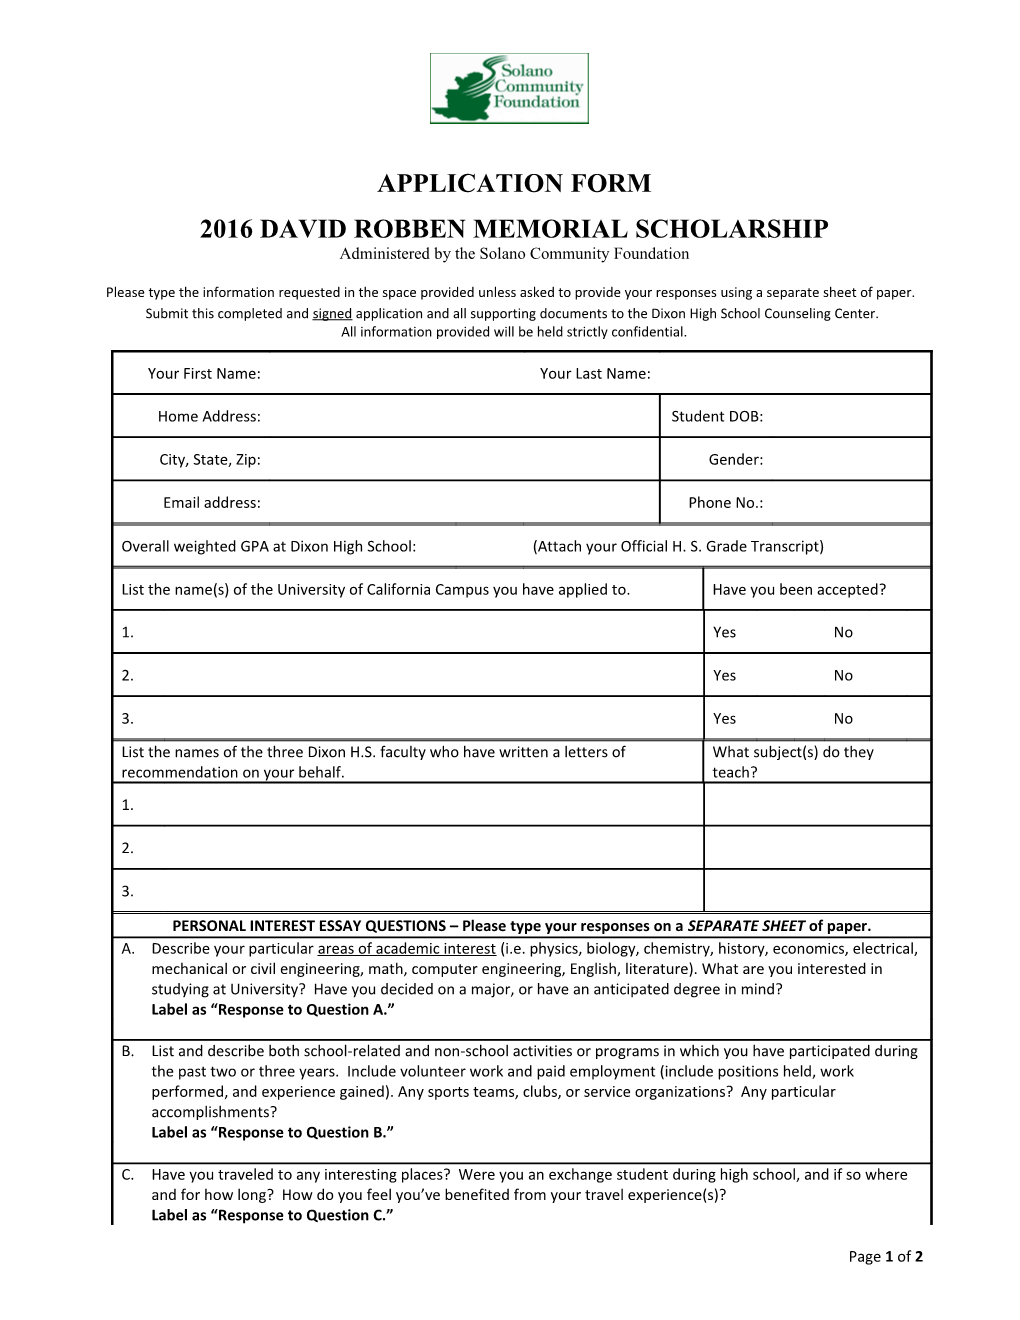 DRMS Application Form